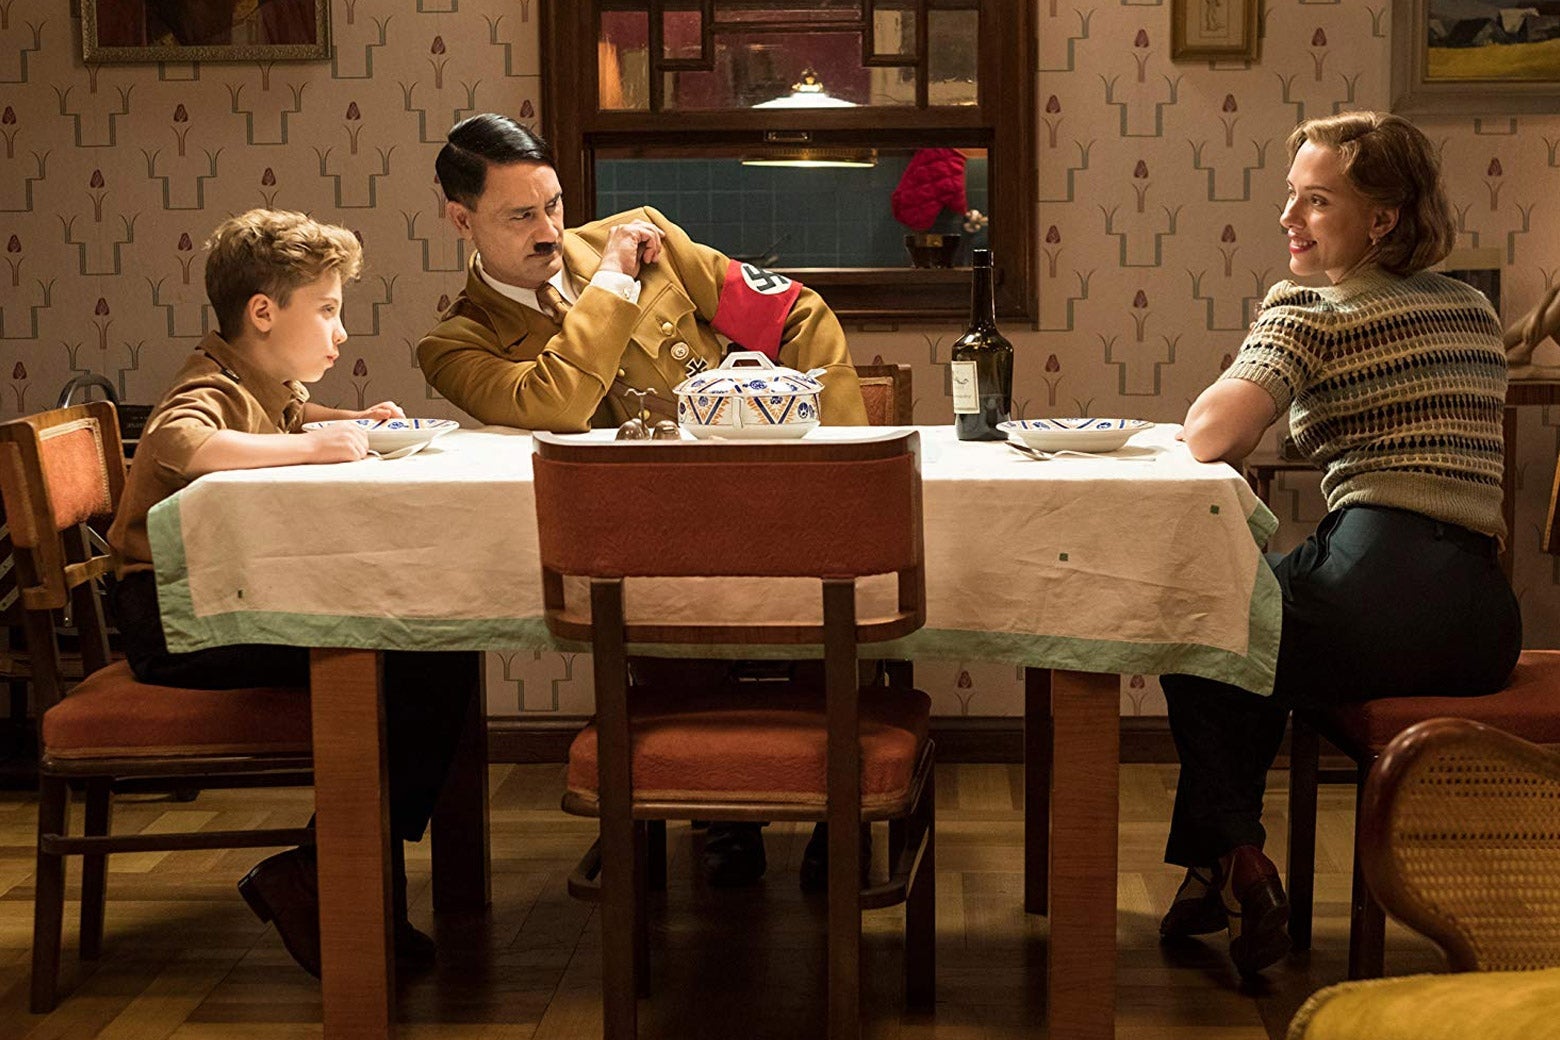 Roman Griffin Davis, Taika Waititi (as Hitler), and Scarlett Johansson sit around a table in a still image from the film.